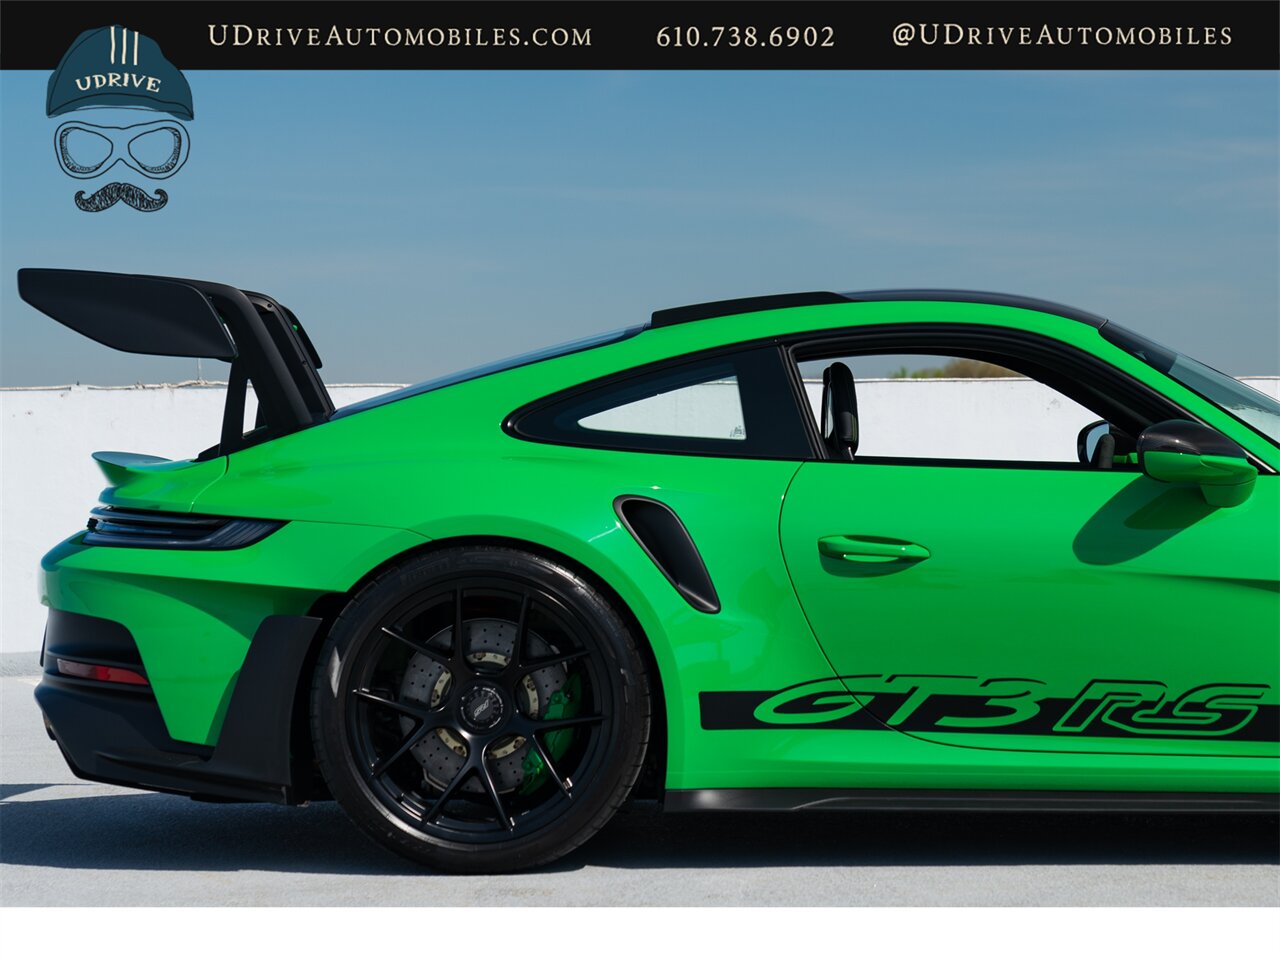 2023 Porsche 911 GT3 RS  Weissach Pkg FAL Full Body PPF $43k in Extras - Photo 24 - West Chester, PA 19382